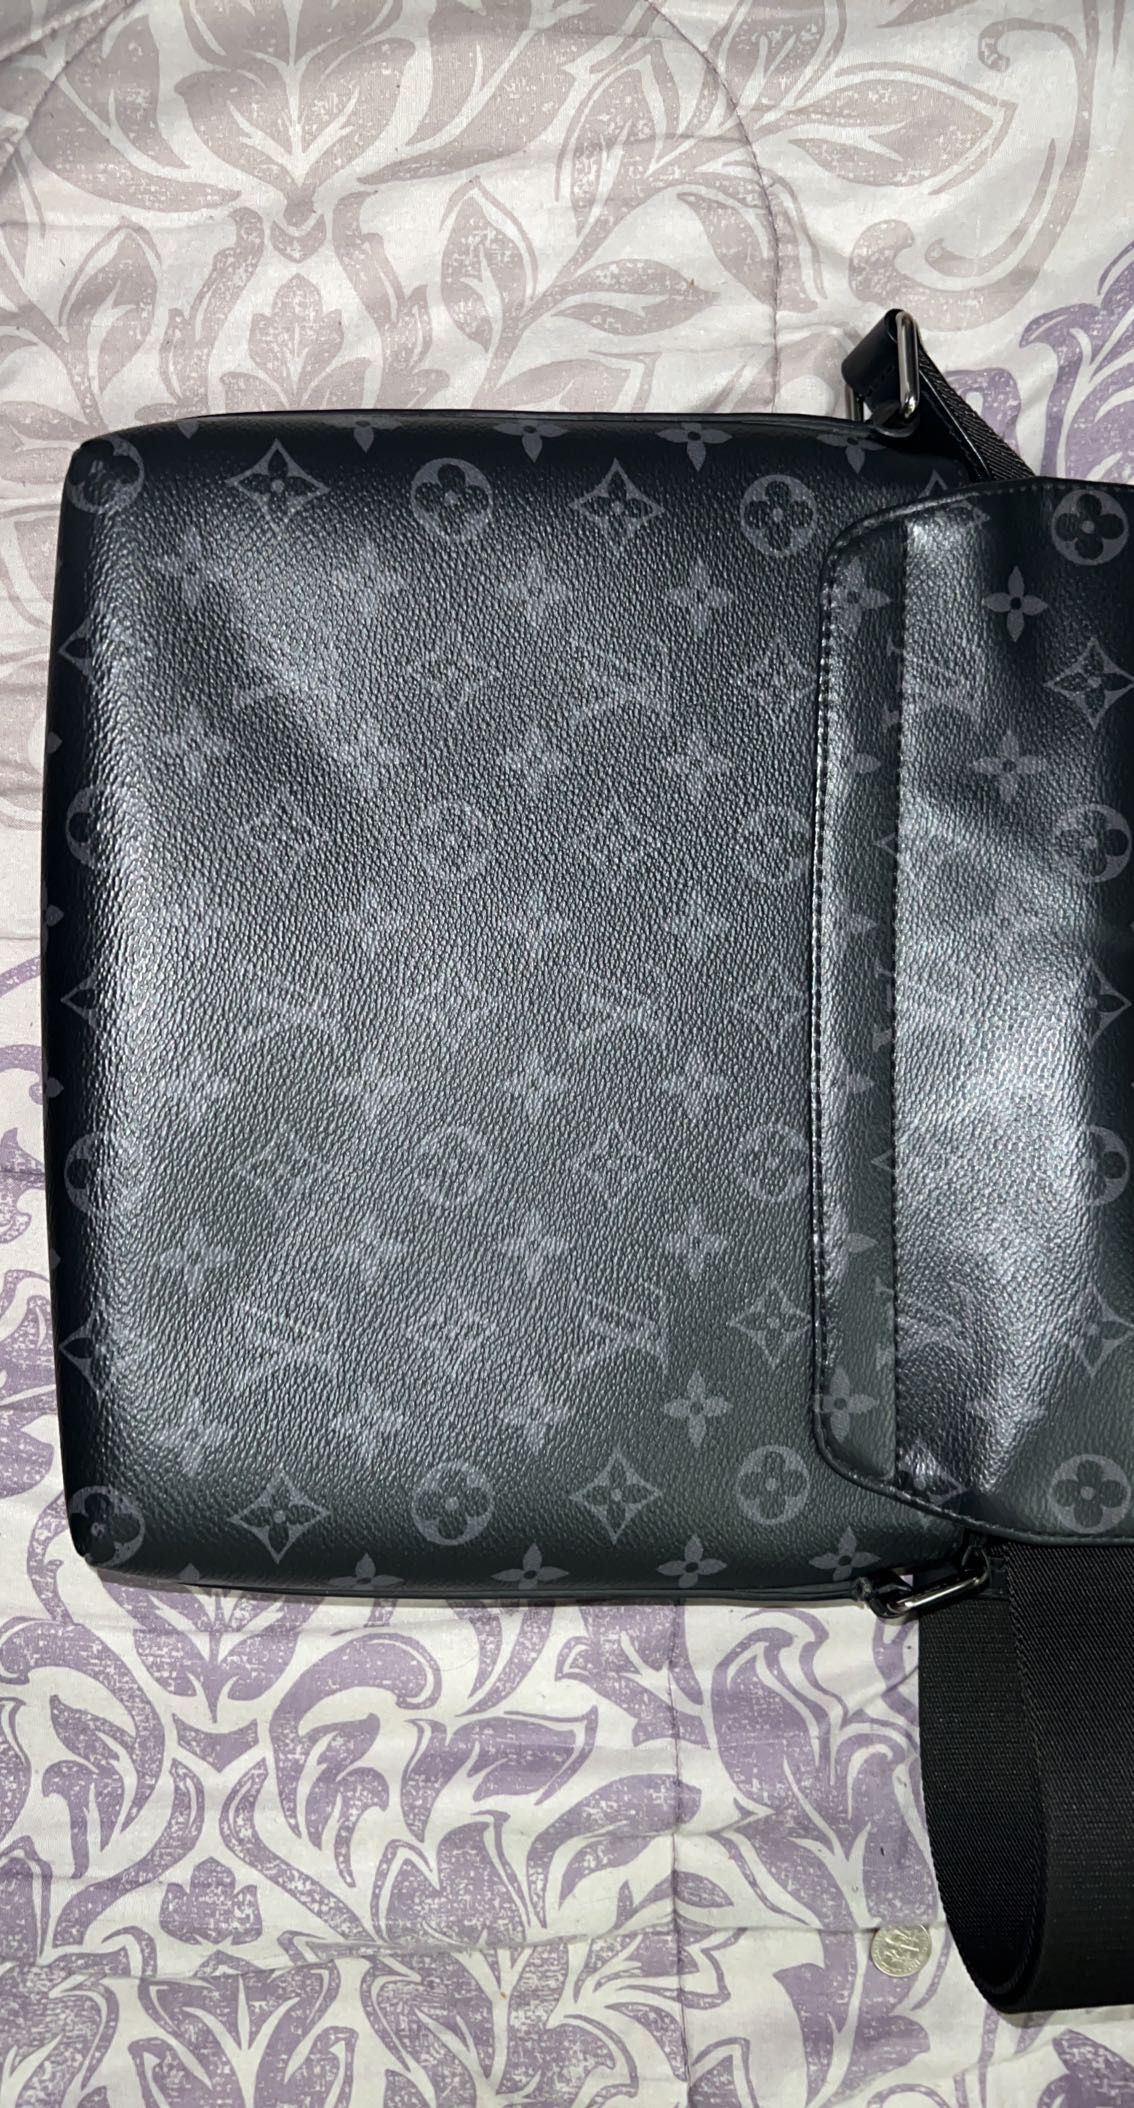 Louis Vuitton Papillon Trunk Bags for Sale in Clayton, NC - OfferUp